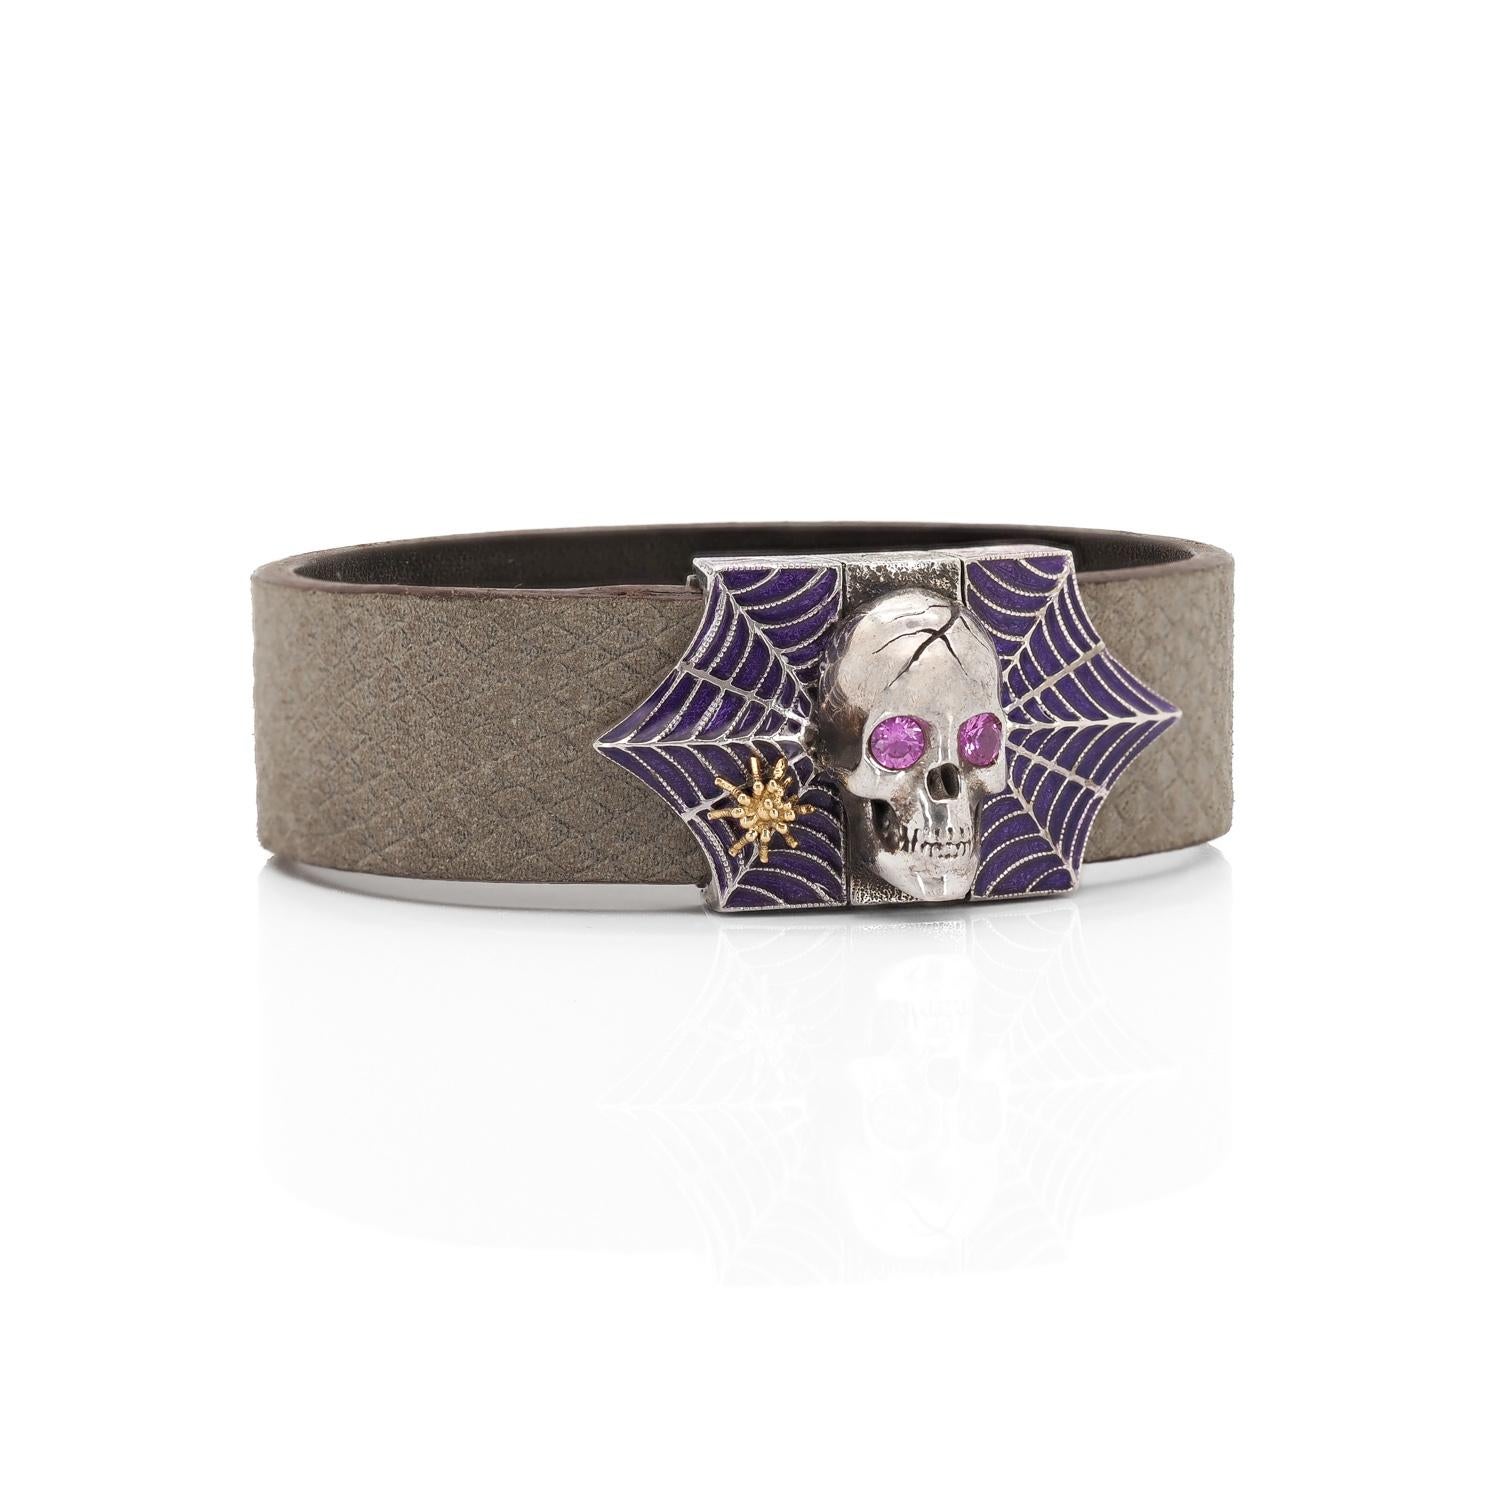 The Skull & Spider Web Bracelet features a 18K gold spider on its silver spider web with purple enamel. The eyes of the skull, set with pink sapphires, adds a special glare to the bracelet. The bracelet is strapped by an embossed grey leather strap,